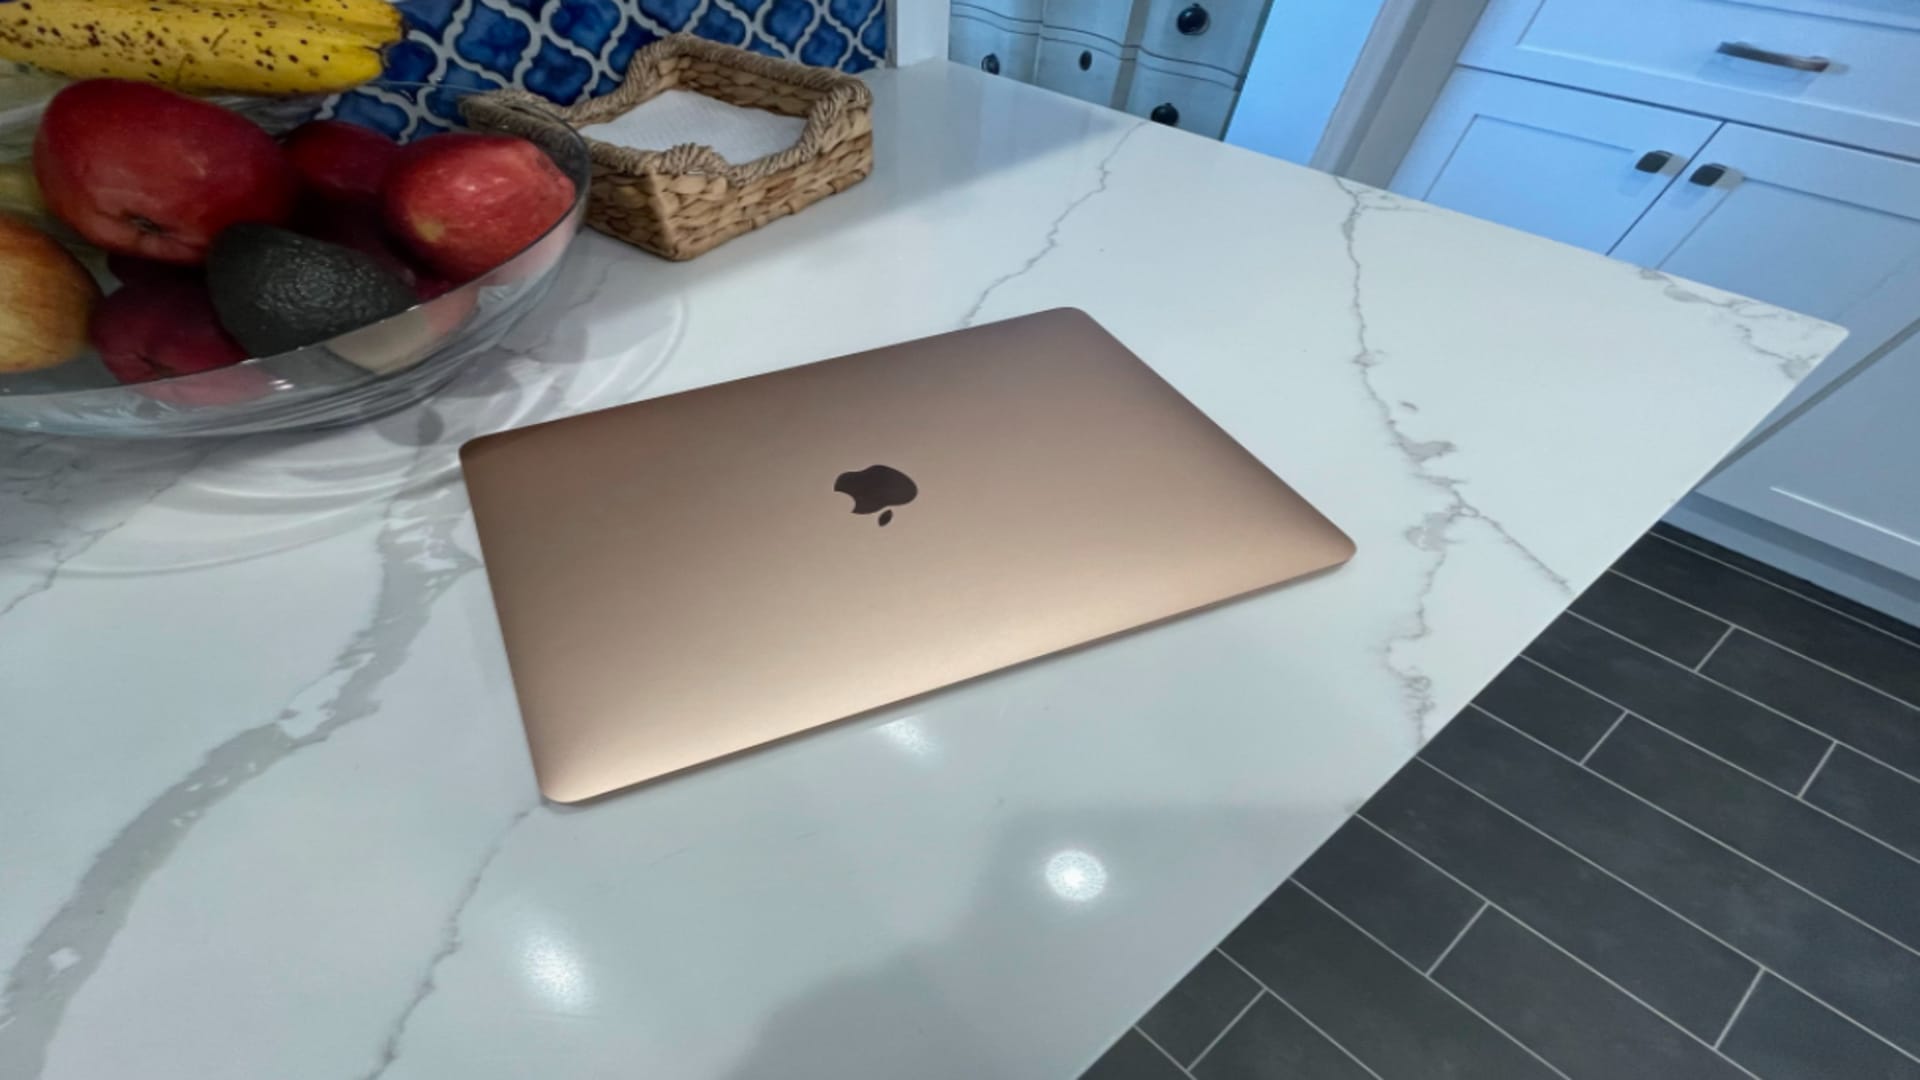 2020 MacBook Air with M1 chip